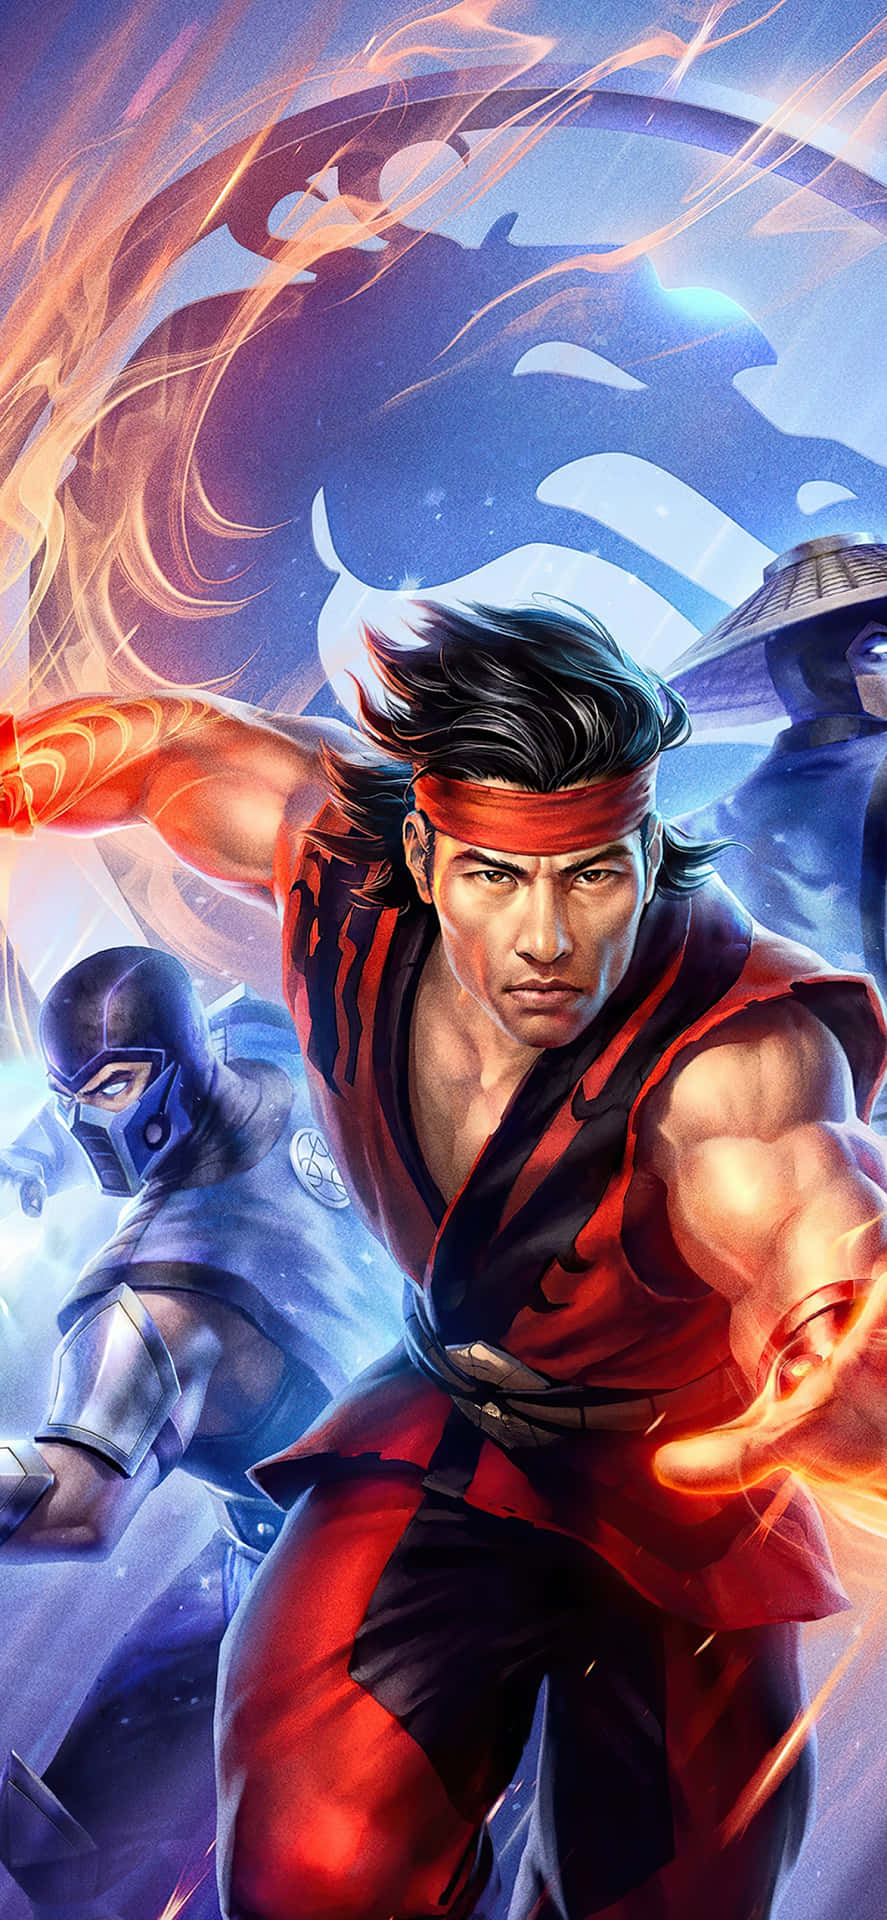 Slay the competition with the new Mortal Kombat for iPhone. Wallpaper